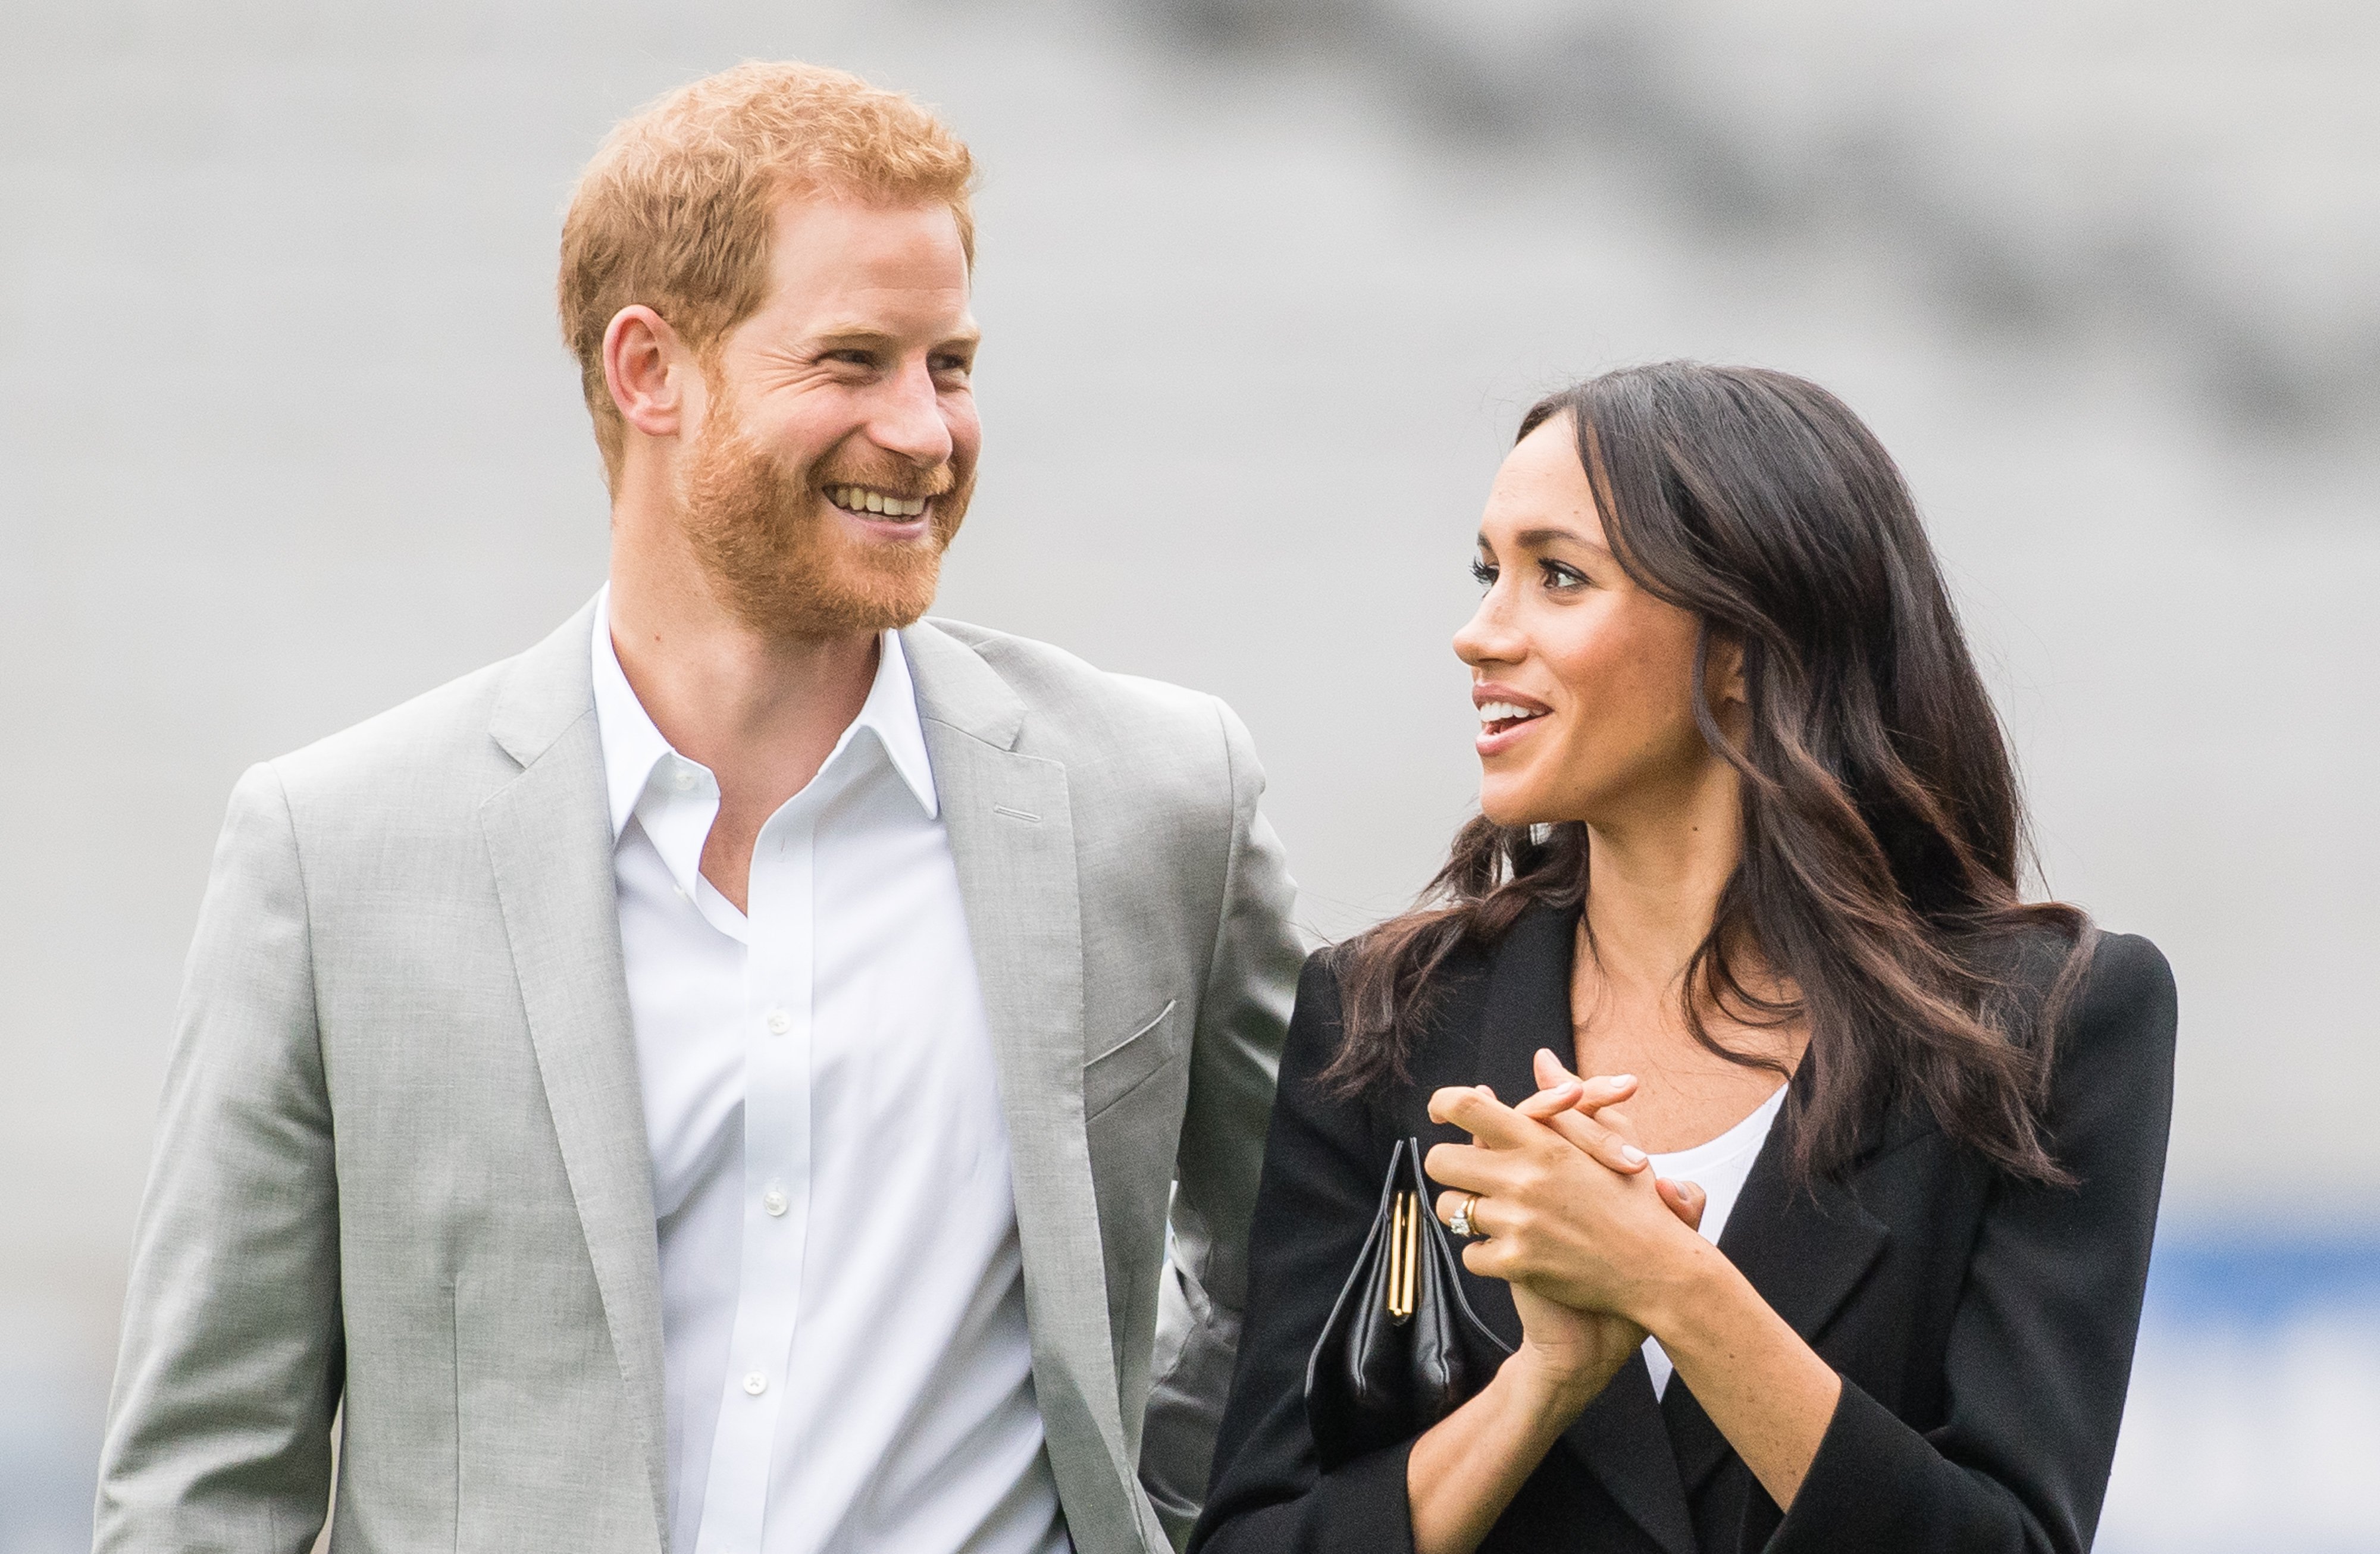 Prince Harry and Duchess Meghan visit Croke Park at the organization, the Gaelic Athletic Association, on July 11, 2018, in Dublin, Ireland. | Source: Getty Images